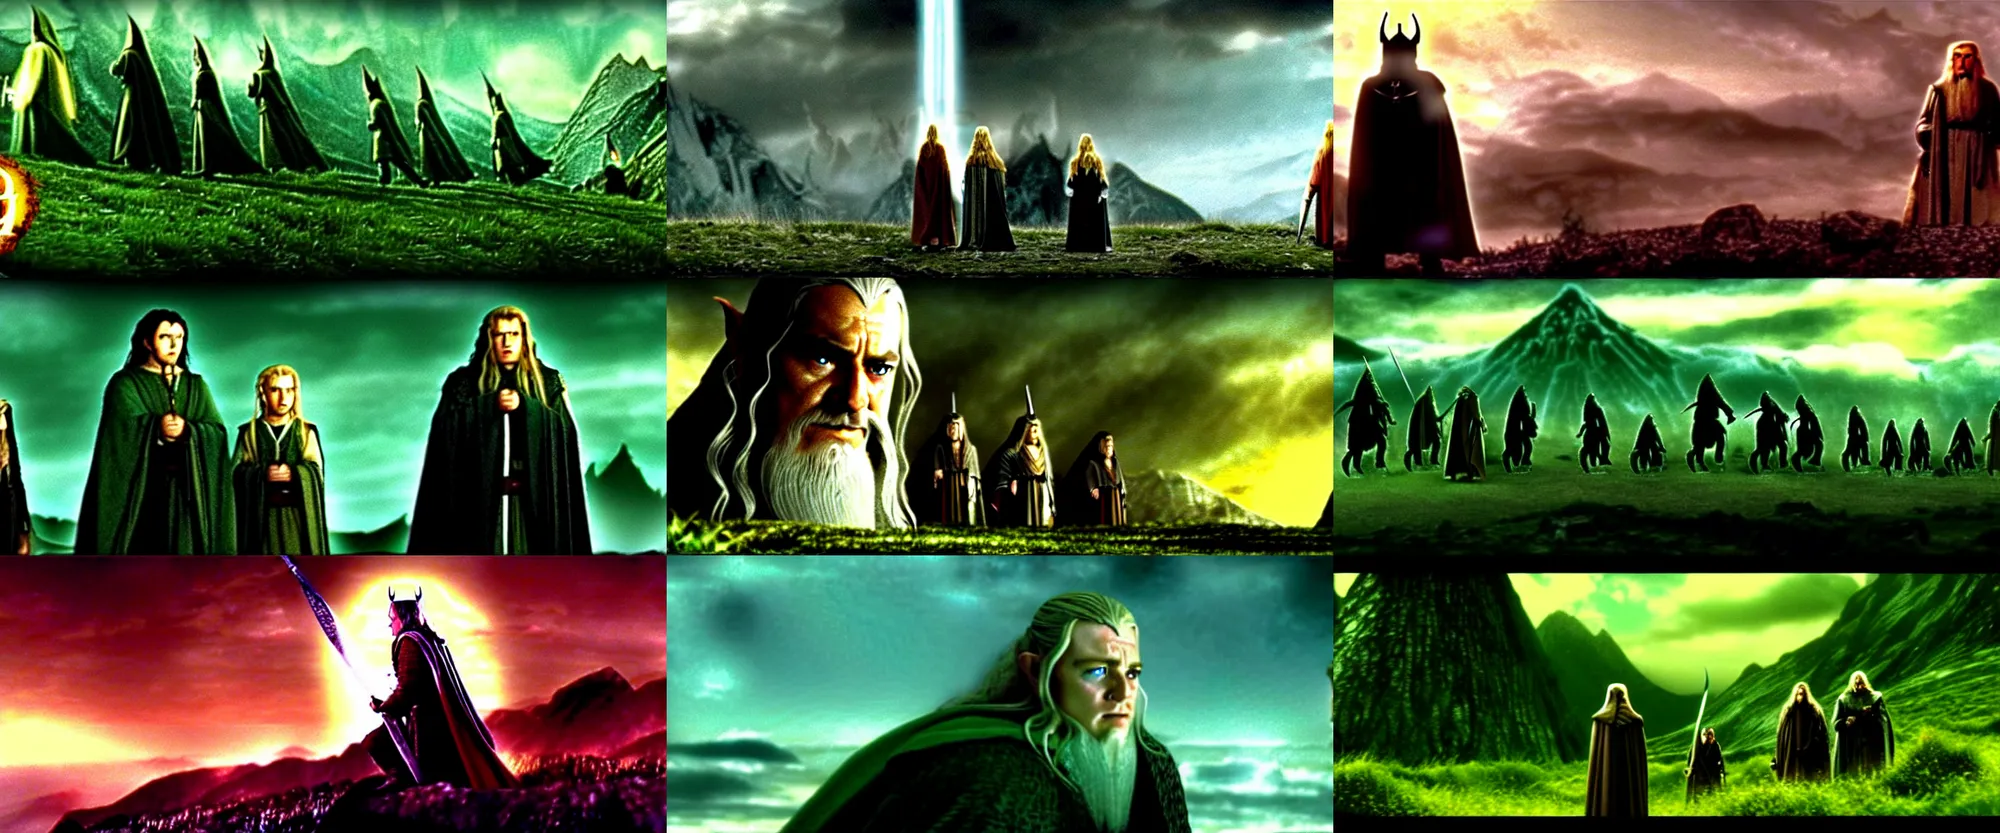 Prompt: a still frame from The Lord of the Rings: The Two Towers (2002) in the style of Toonami